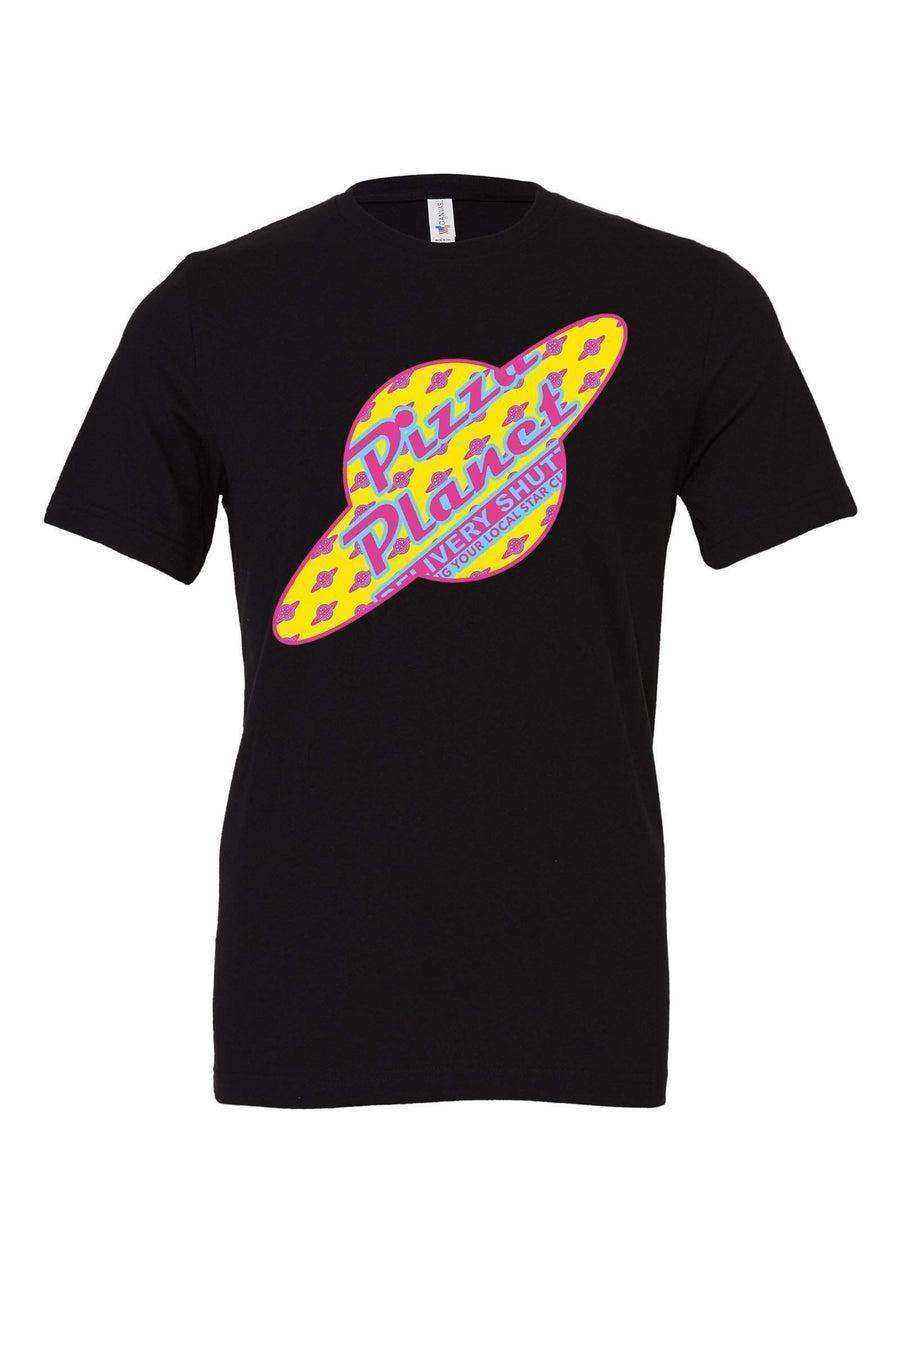 Womens | Pizza Planet Shirt Yellow Print | Toy Story Shirt - Dylan's Tees